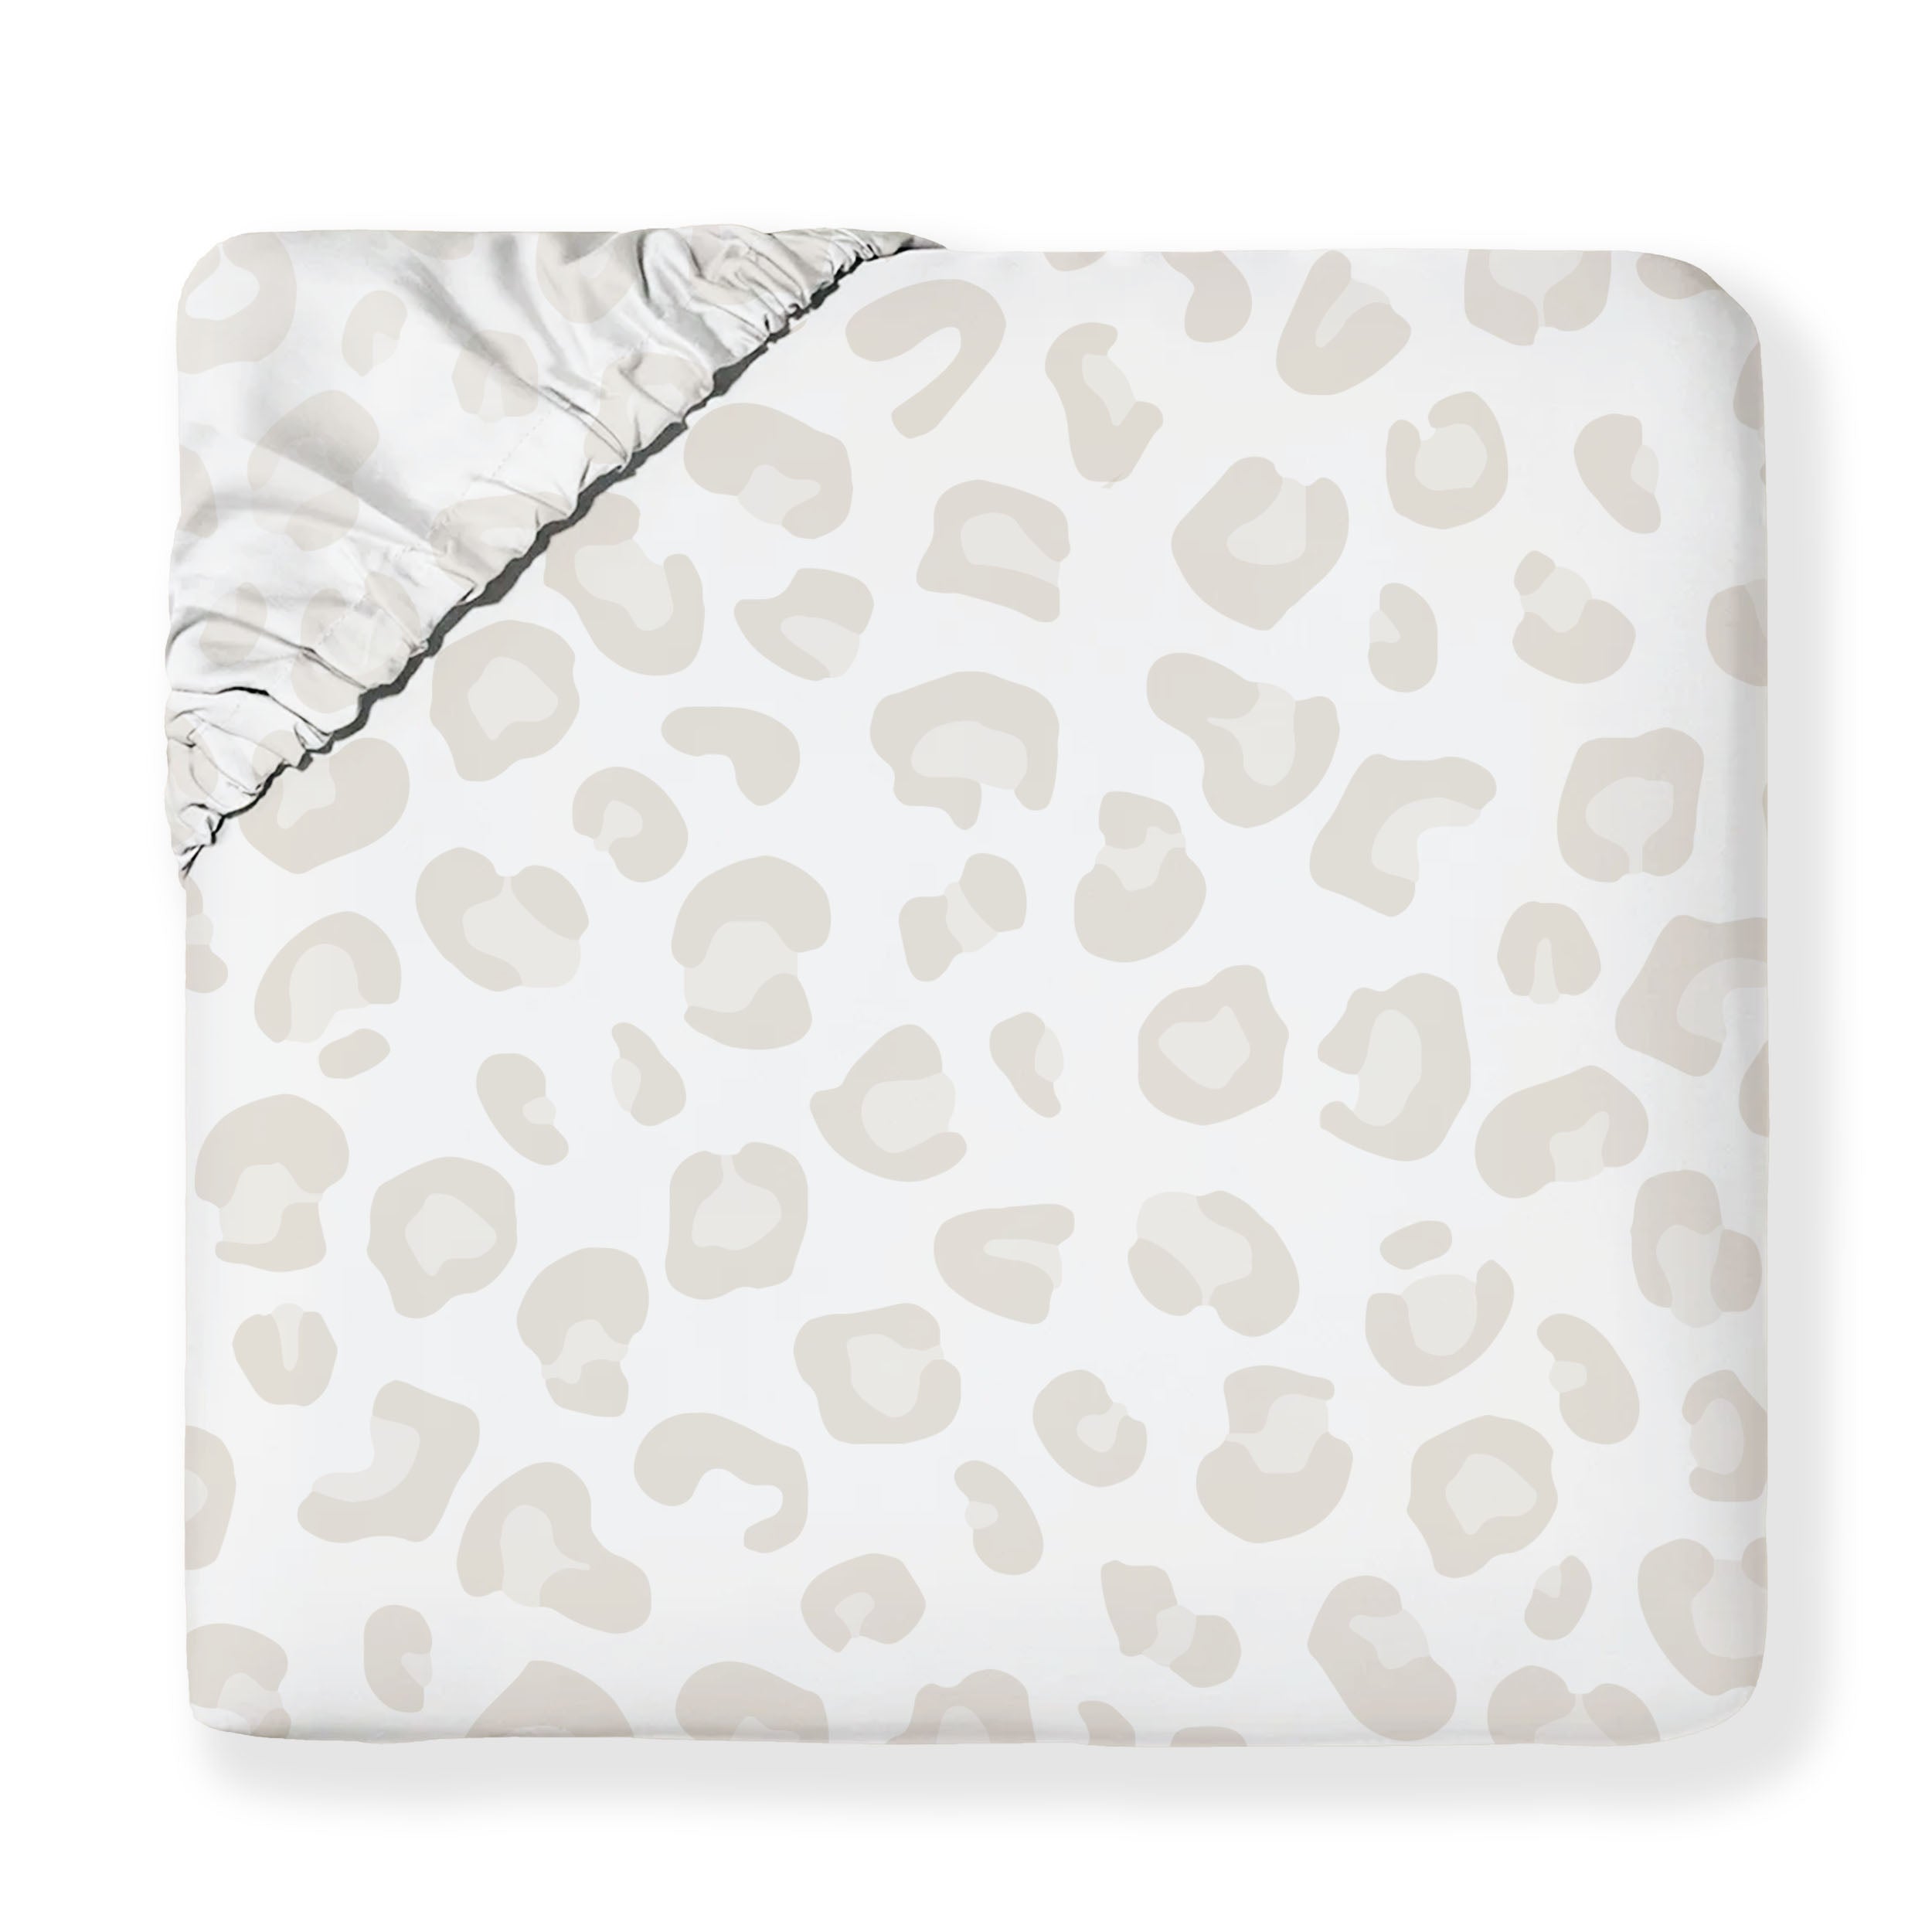 A Wild Organic Cotton Fitted Sheet Set by Makemake Organics with a beige and white abstract leopard print design, displayed flat with a visible elastic corner.